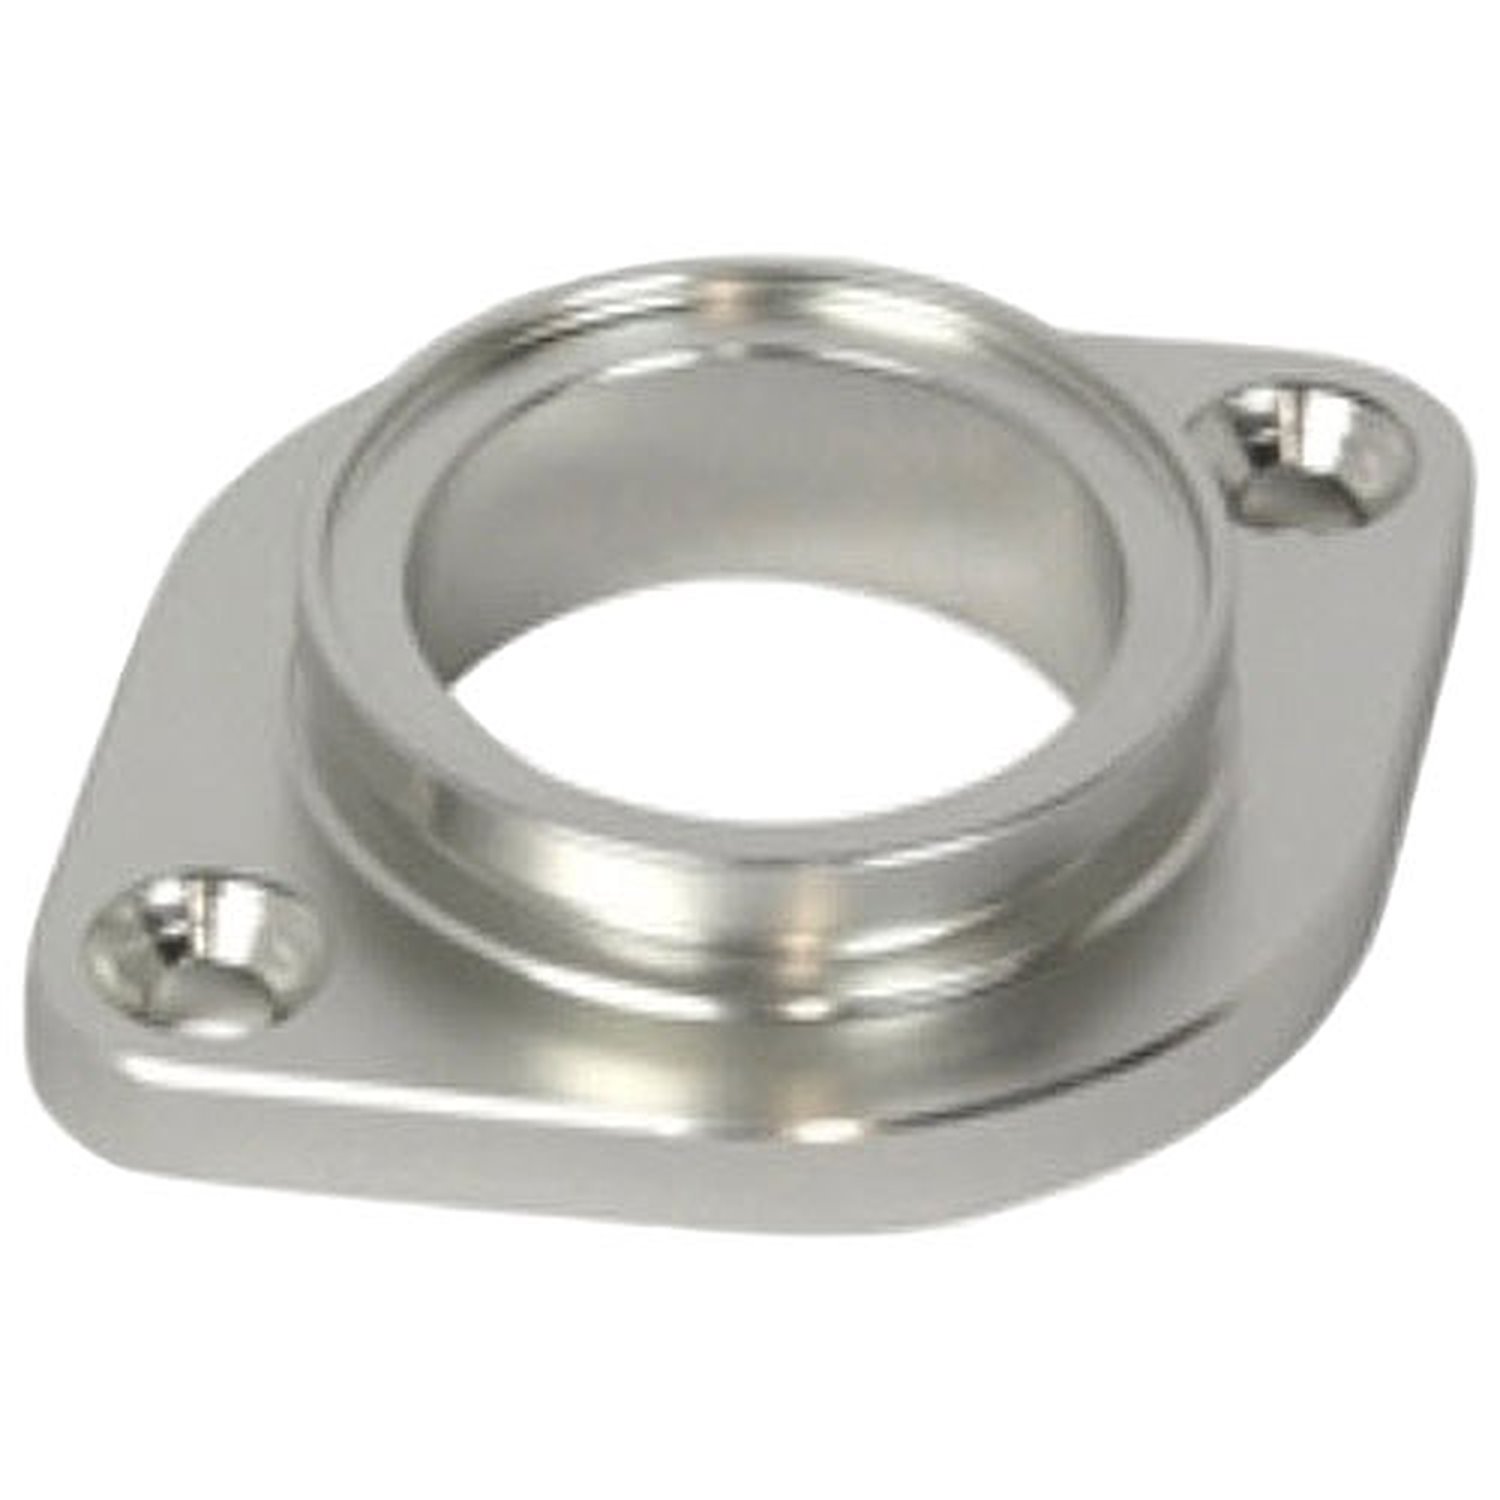 BOV Flange Adapter Allows fitment of Turbosmart Plumb Back, Dual Port and Supersonic Universal BOV to GReddy style flange